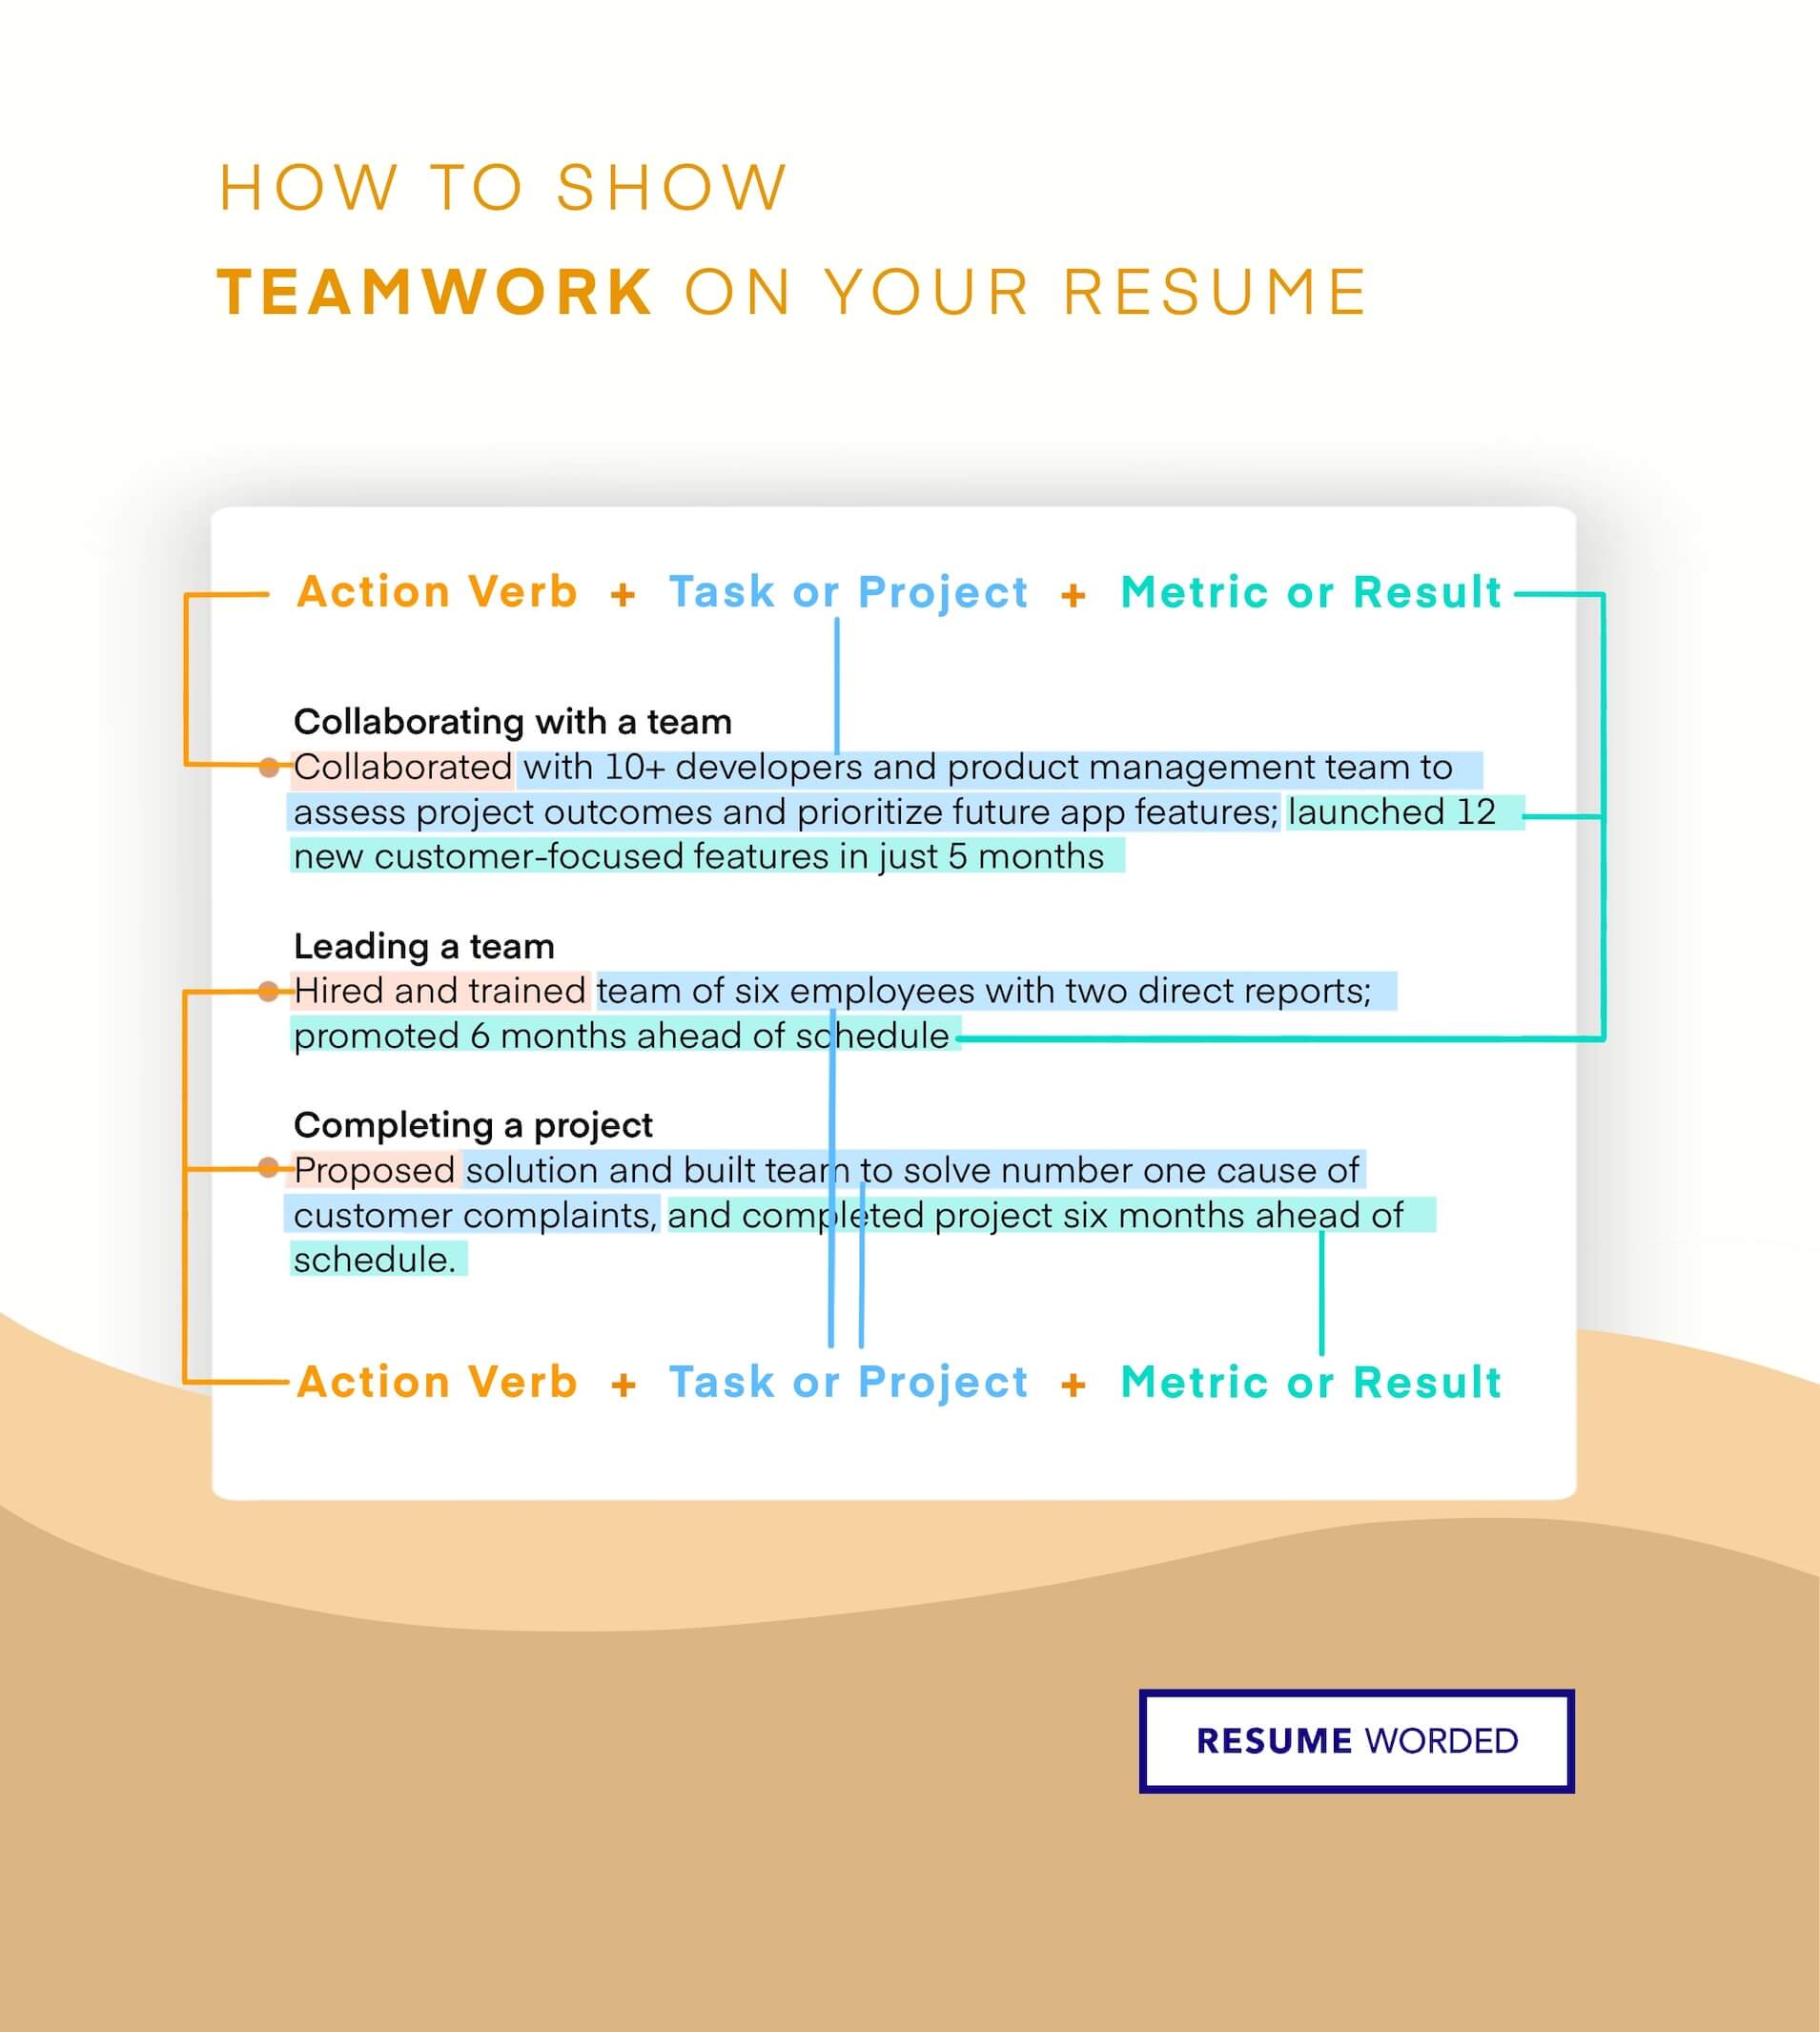 Demonstrate your ability to work with large teams. - Senior C# Developer Resume